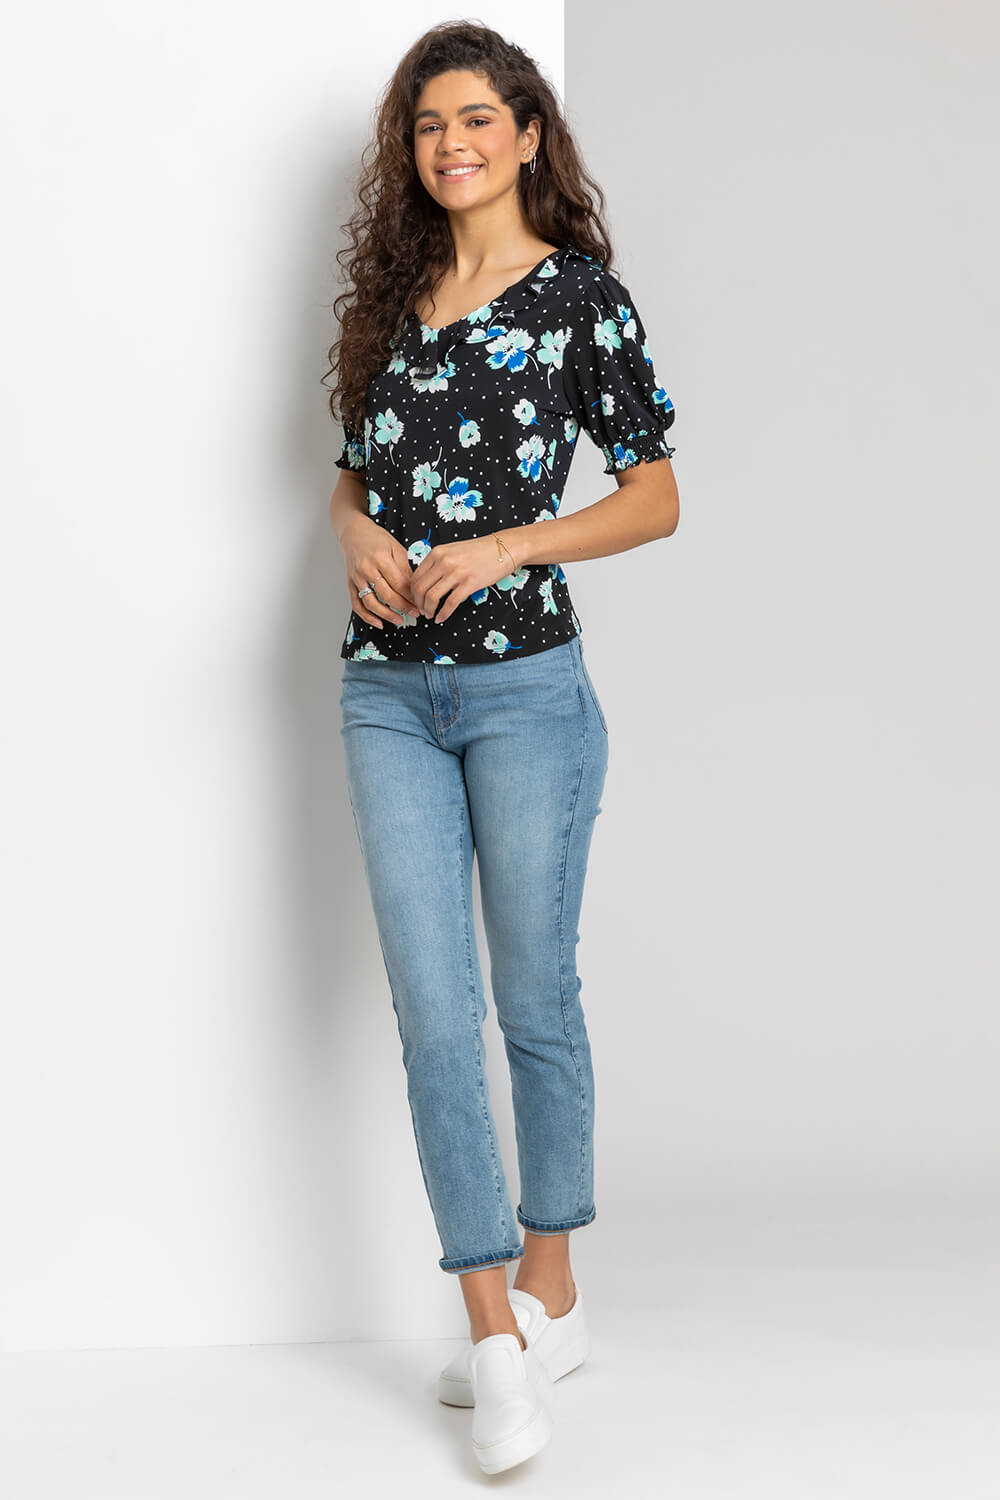 Black Floral Print Frill Neck Top, Image 3 of 4